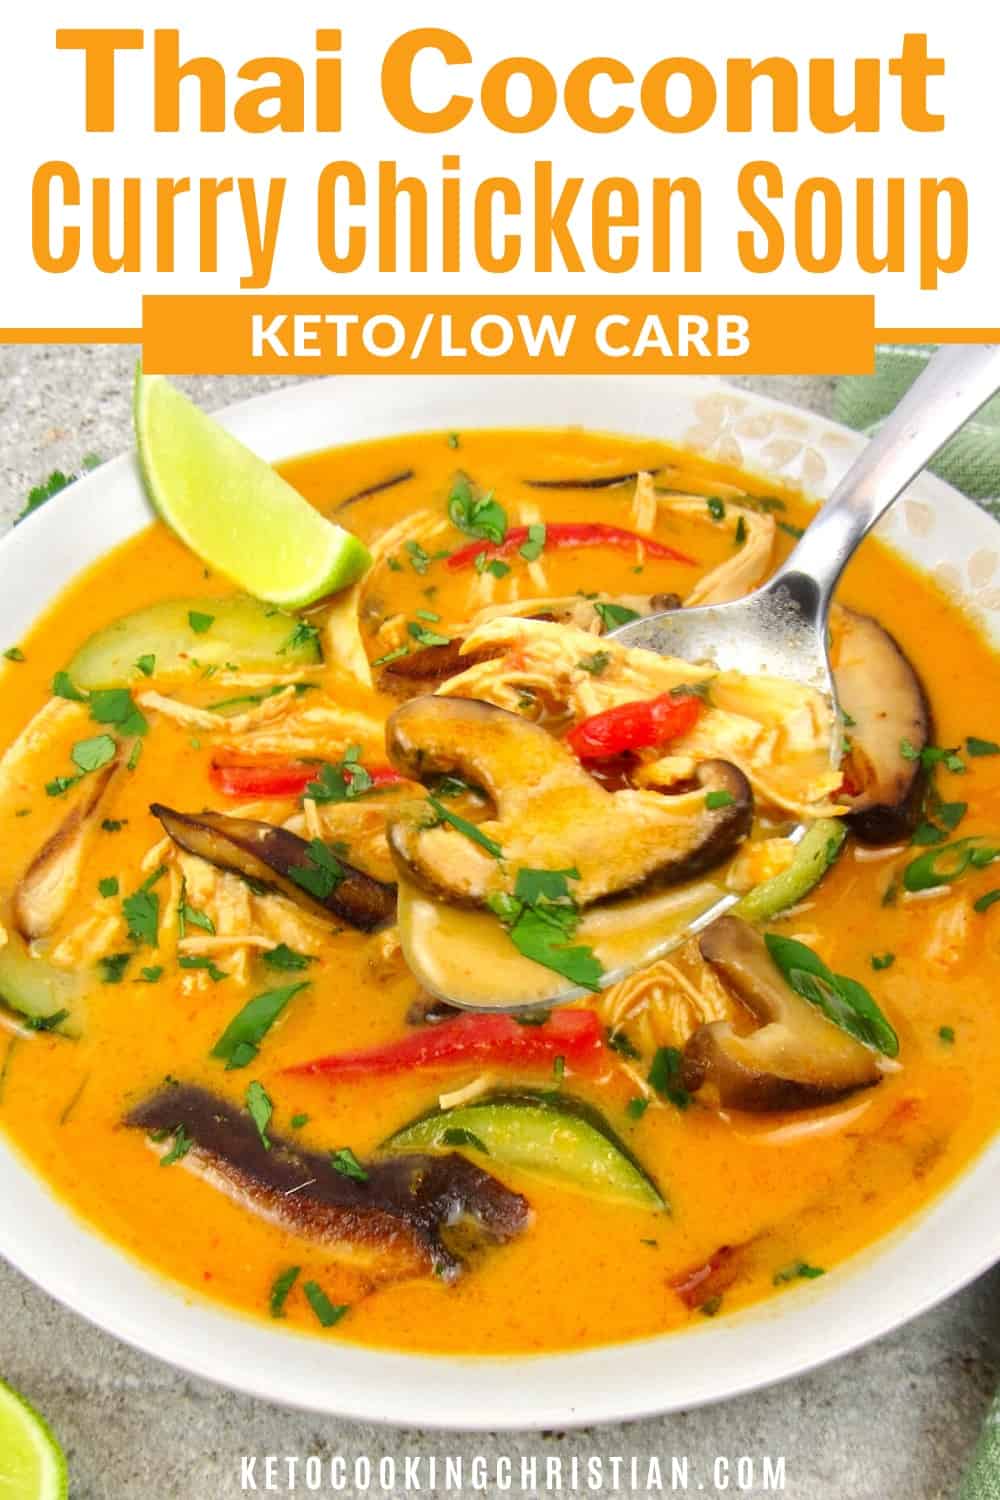 Thai Coconut Curry Chicken Soup - Keto Cooking Christian